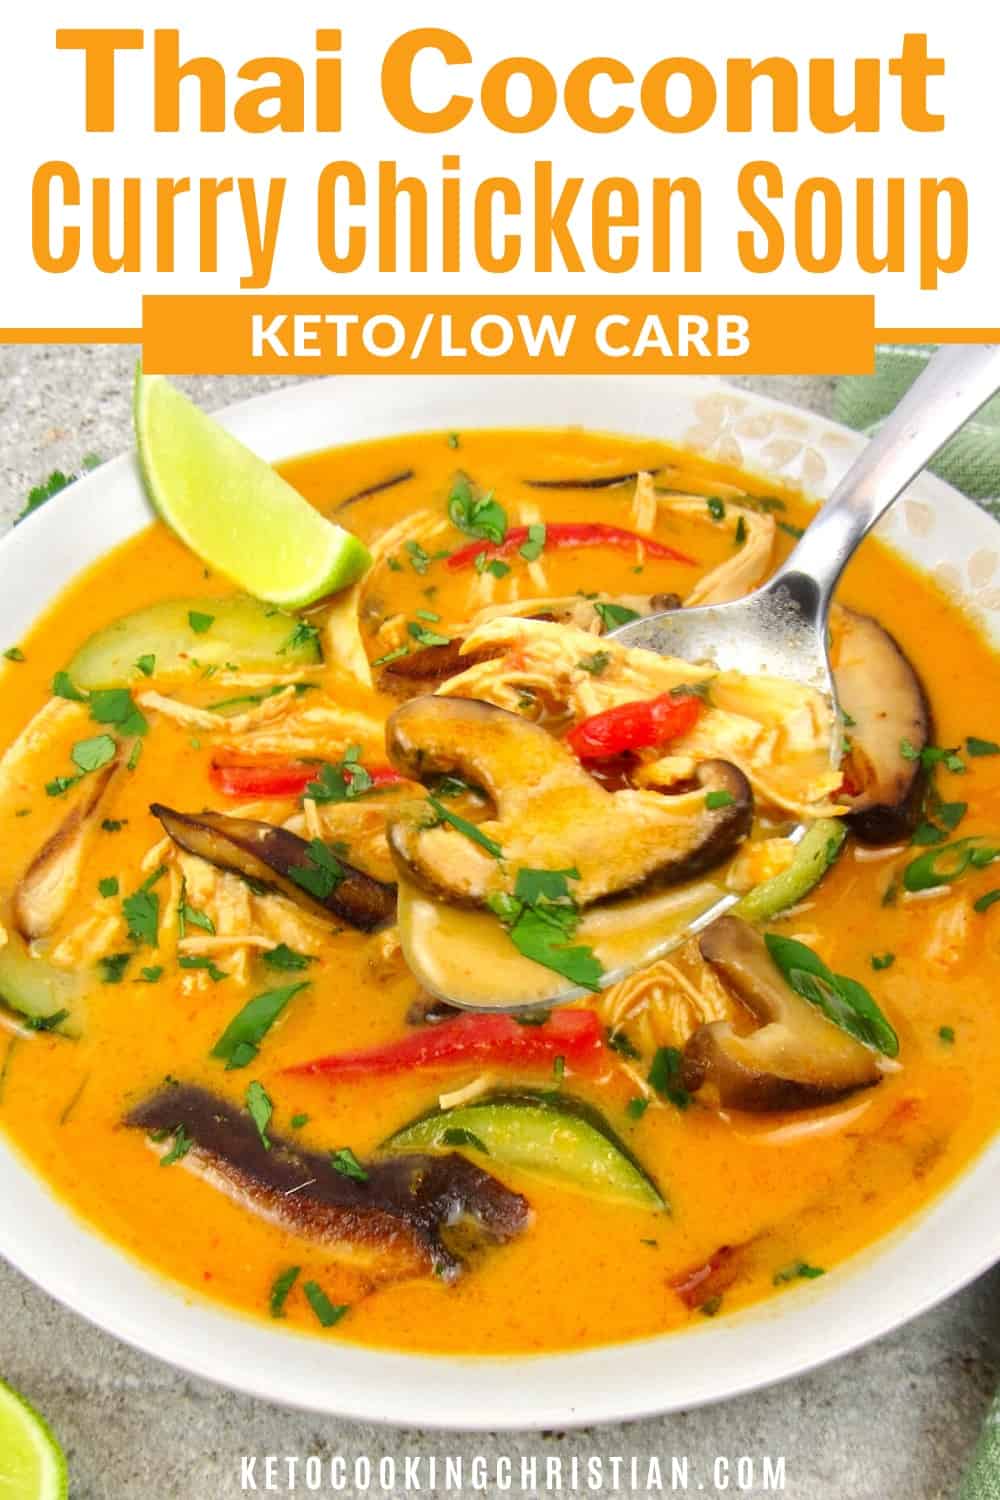 Thai Coconut Curry Chicken Soup - Keto Cooking Christian